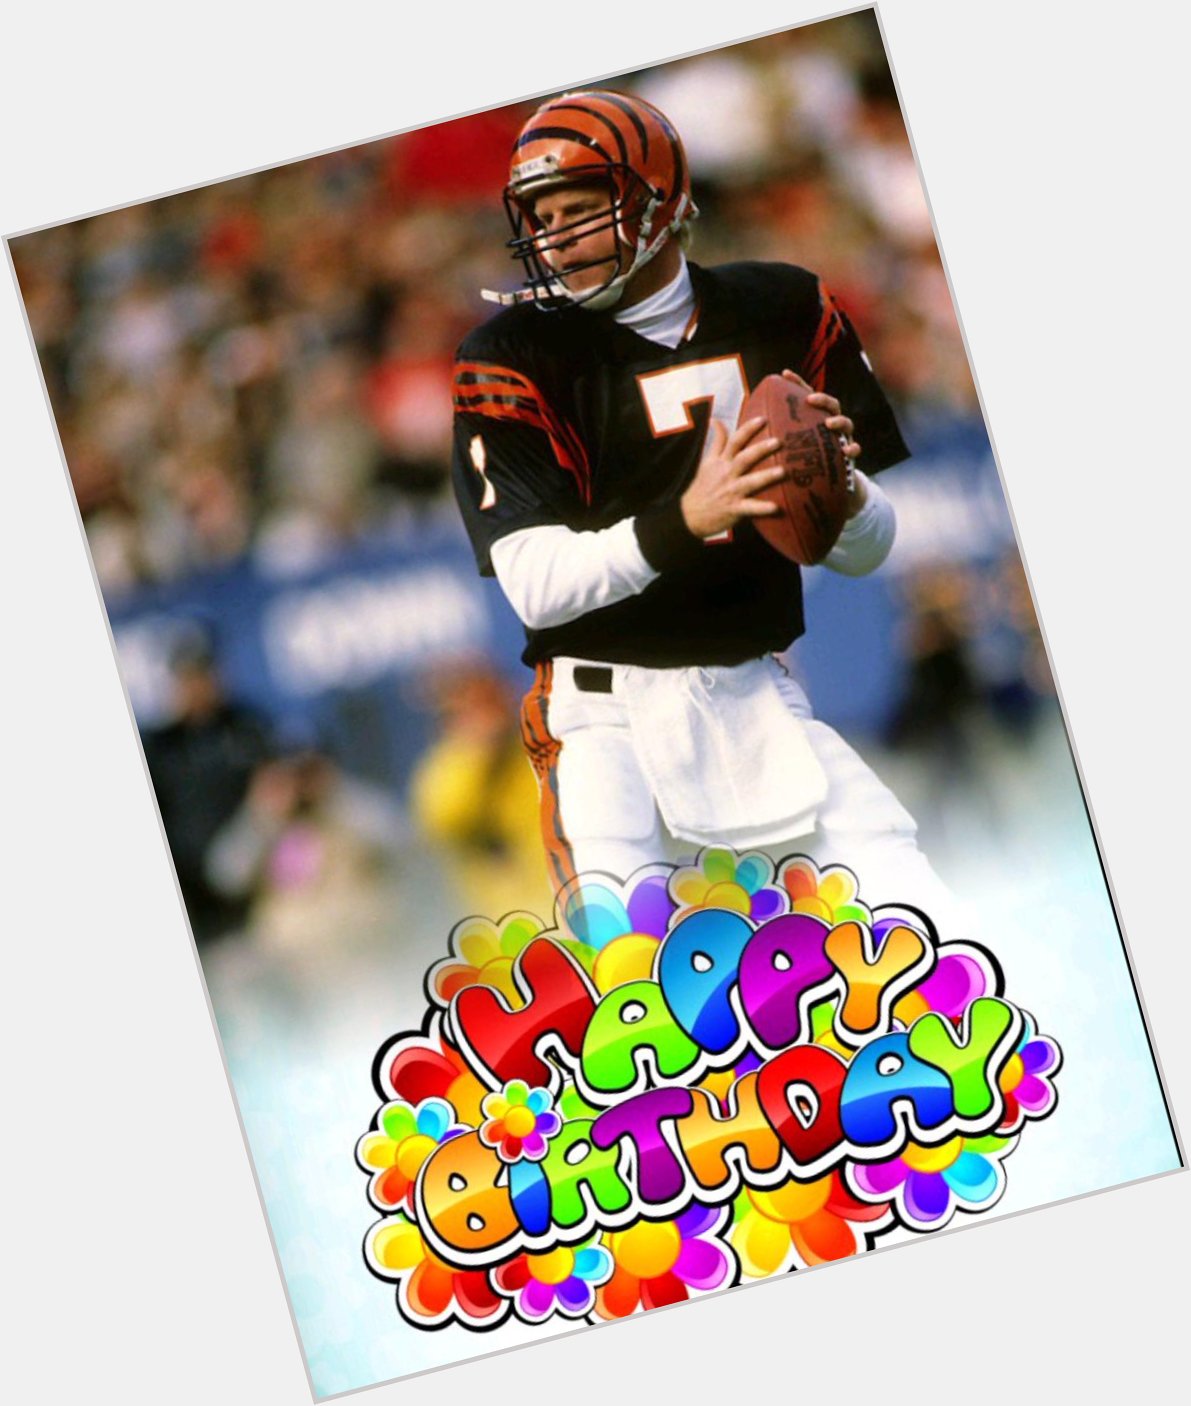 Happy Birthday to Boomer Esiason! Over his 14-year NFL career he went to 4 Pro Bowls and was named NFL MVP in 1988! 